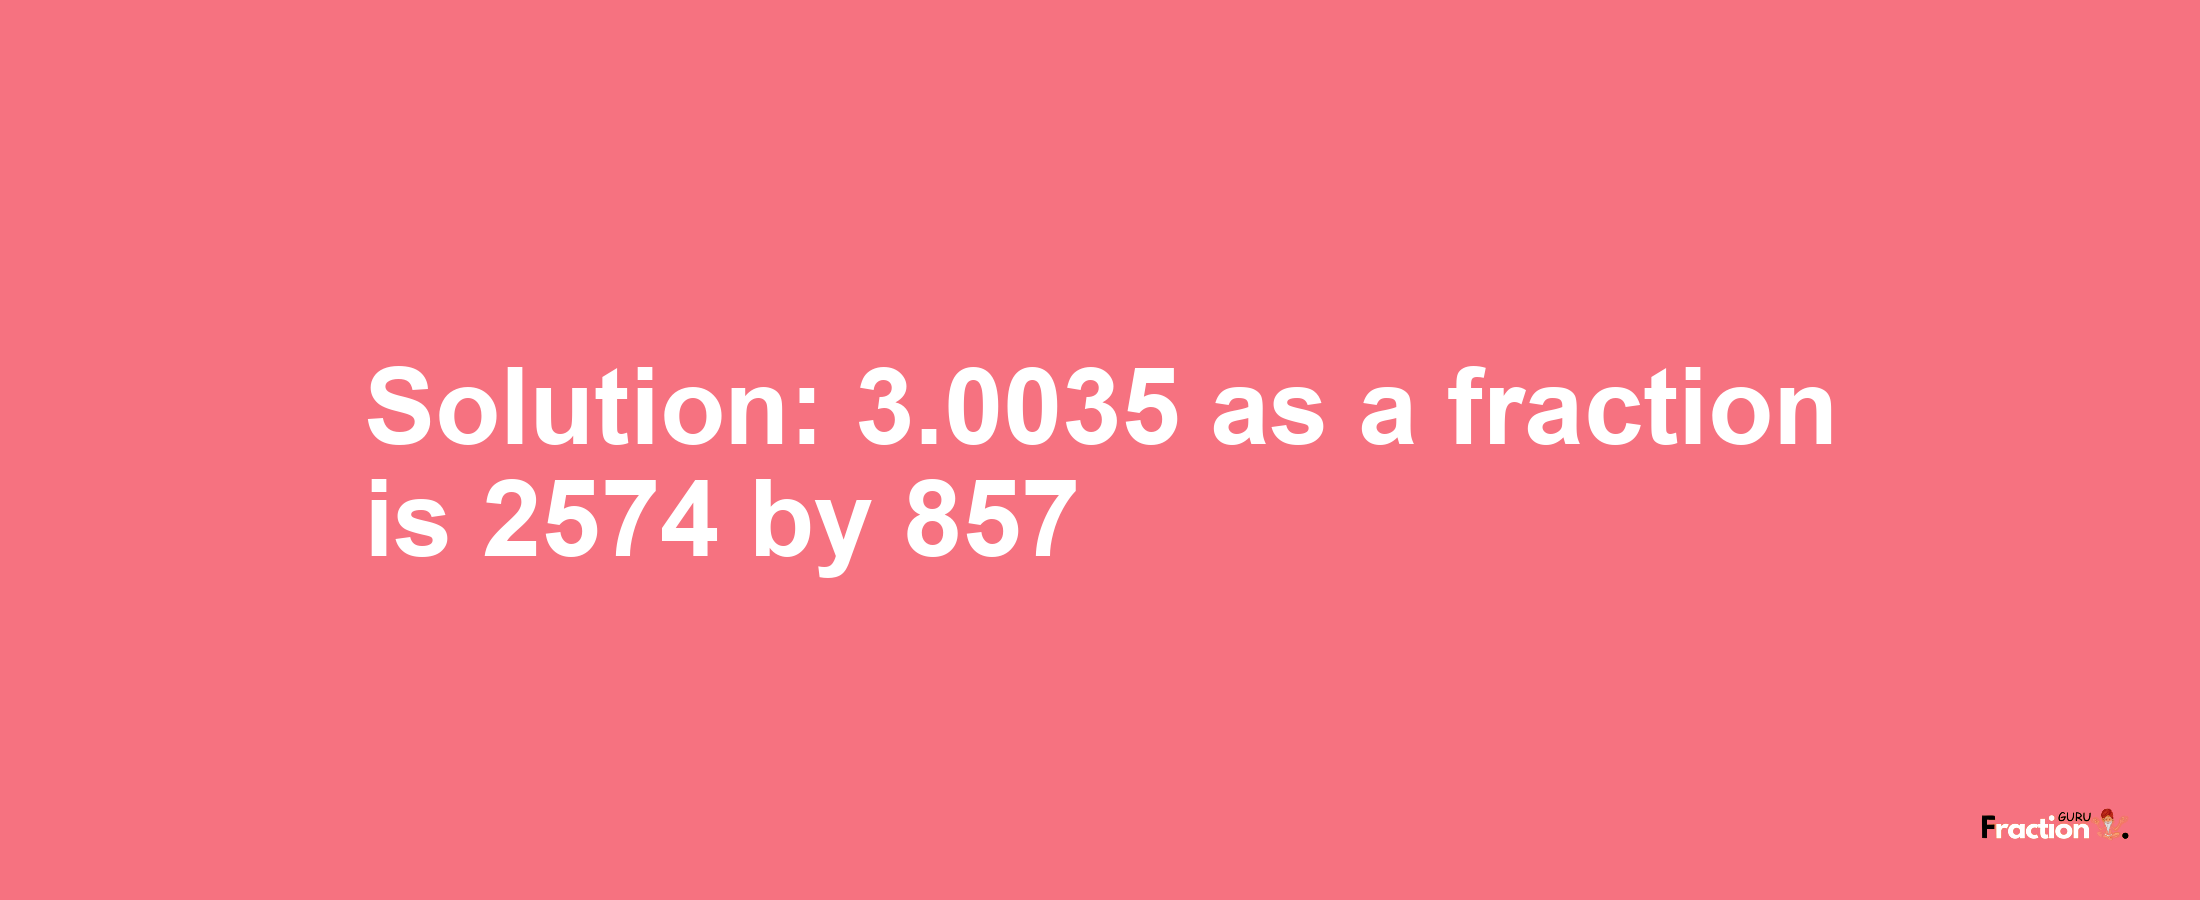 Solution:3.0035 as a fraction is 2574/857